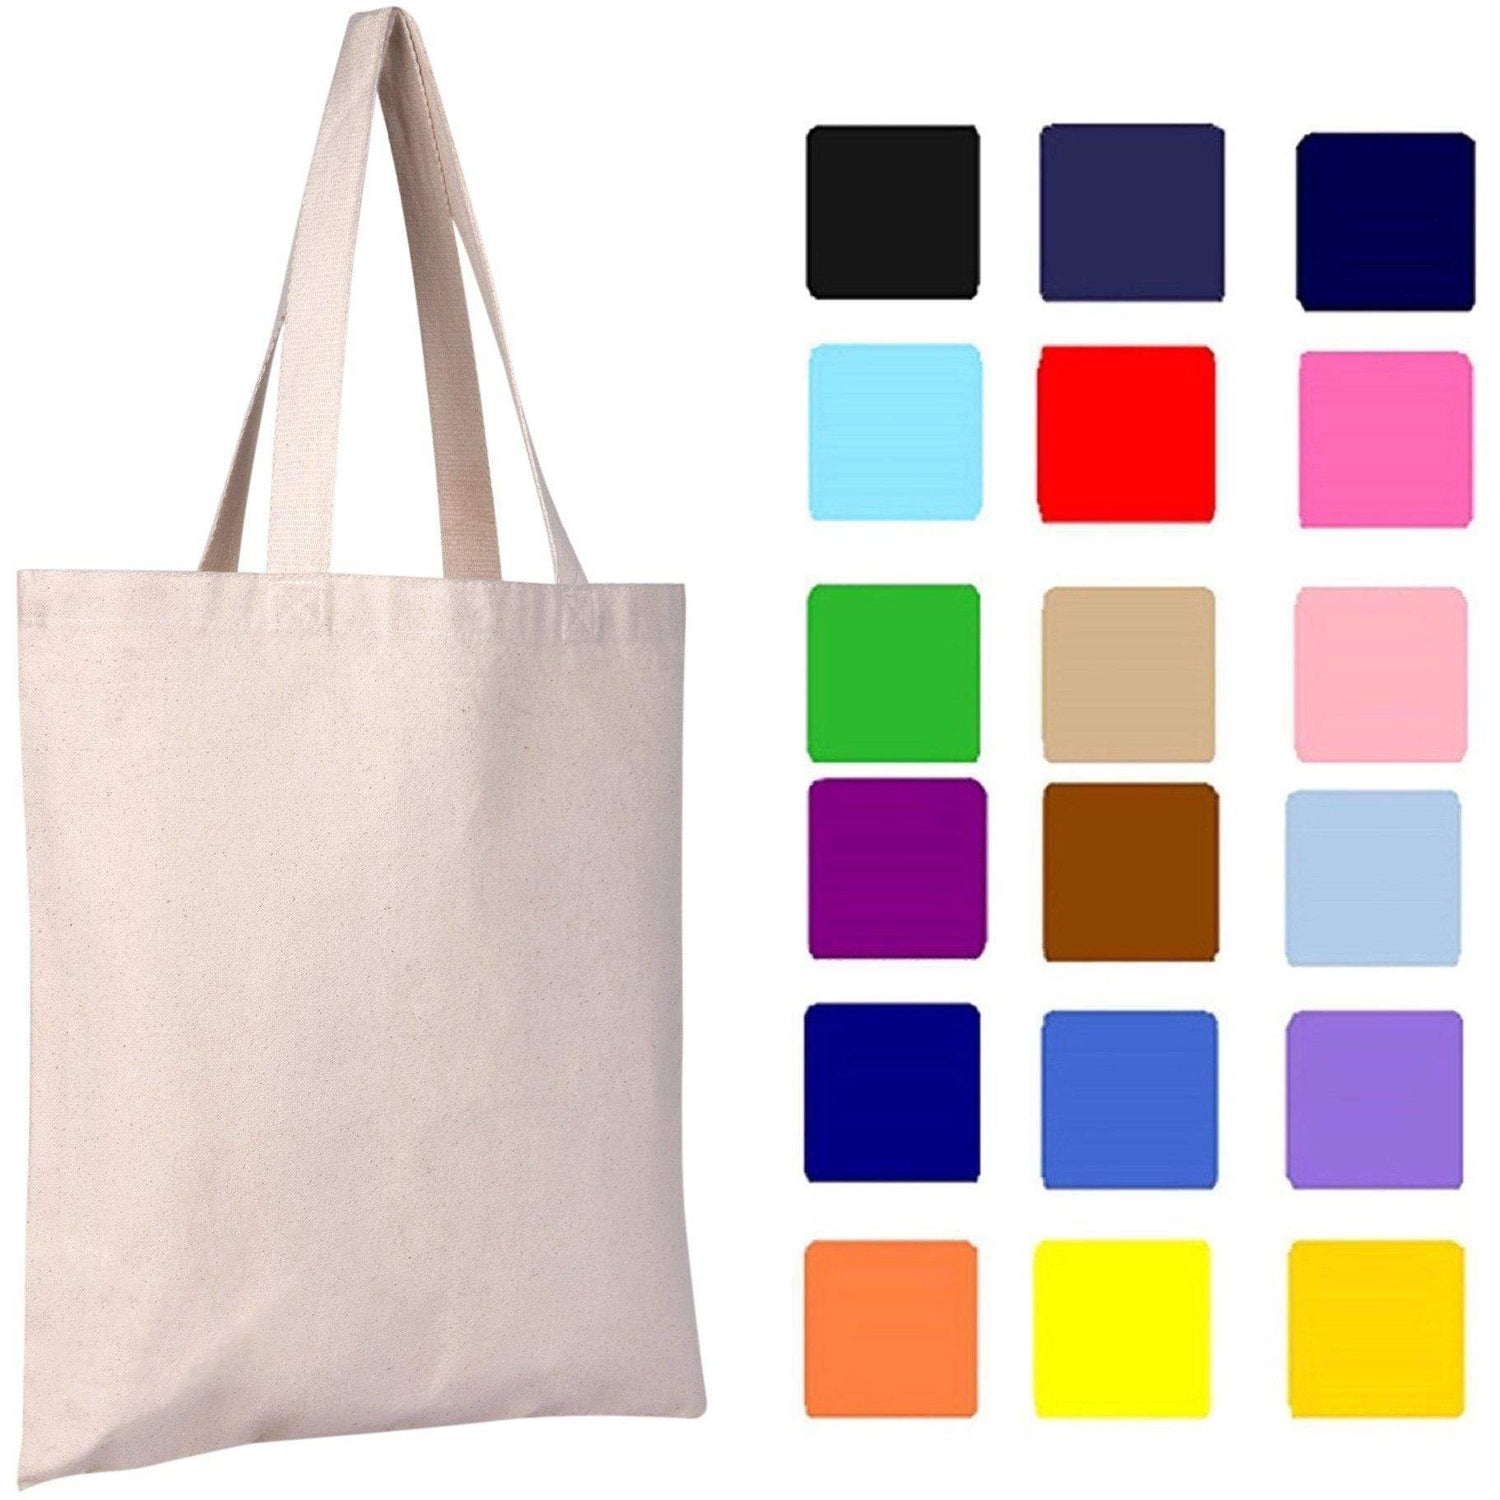 Wholesale Canvas Tote Bags - Promotional Cheap Canvas Bags for Brands